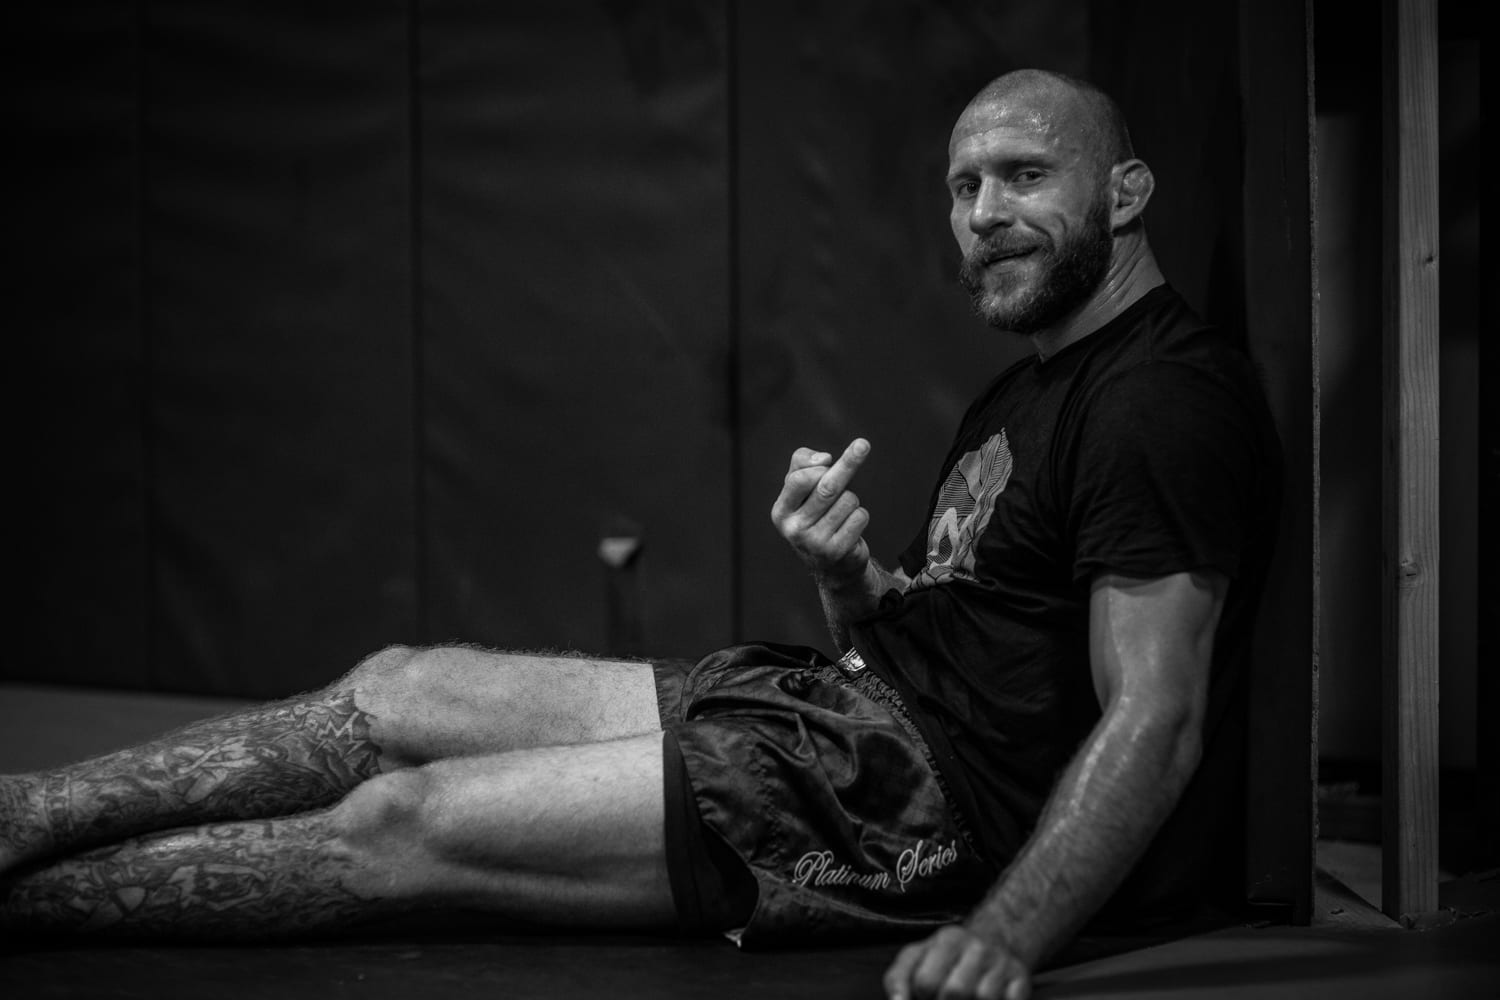 Donald Cerrone Puts Mike Winkeljohn On Blast; Reveals He’s Been Booted Out Of The Team For Next Fight